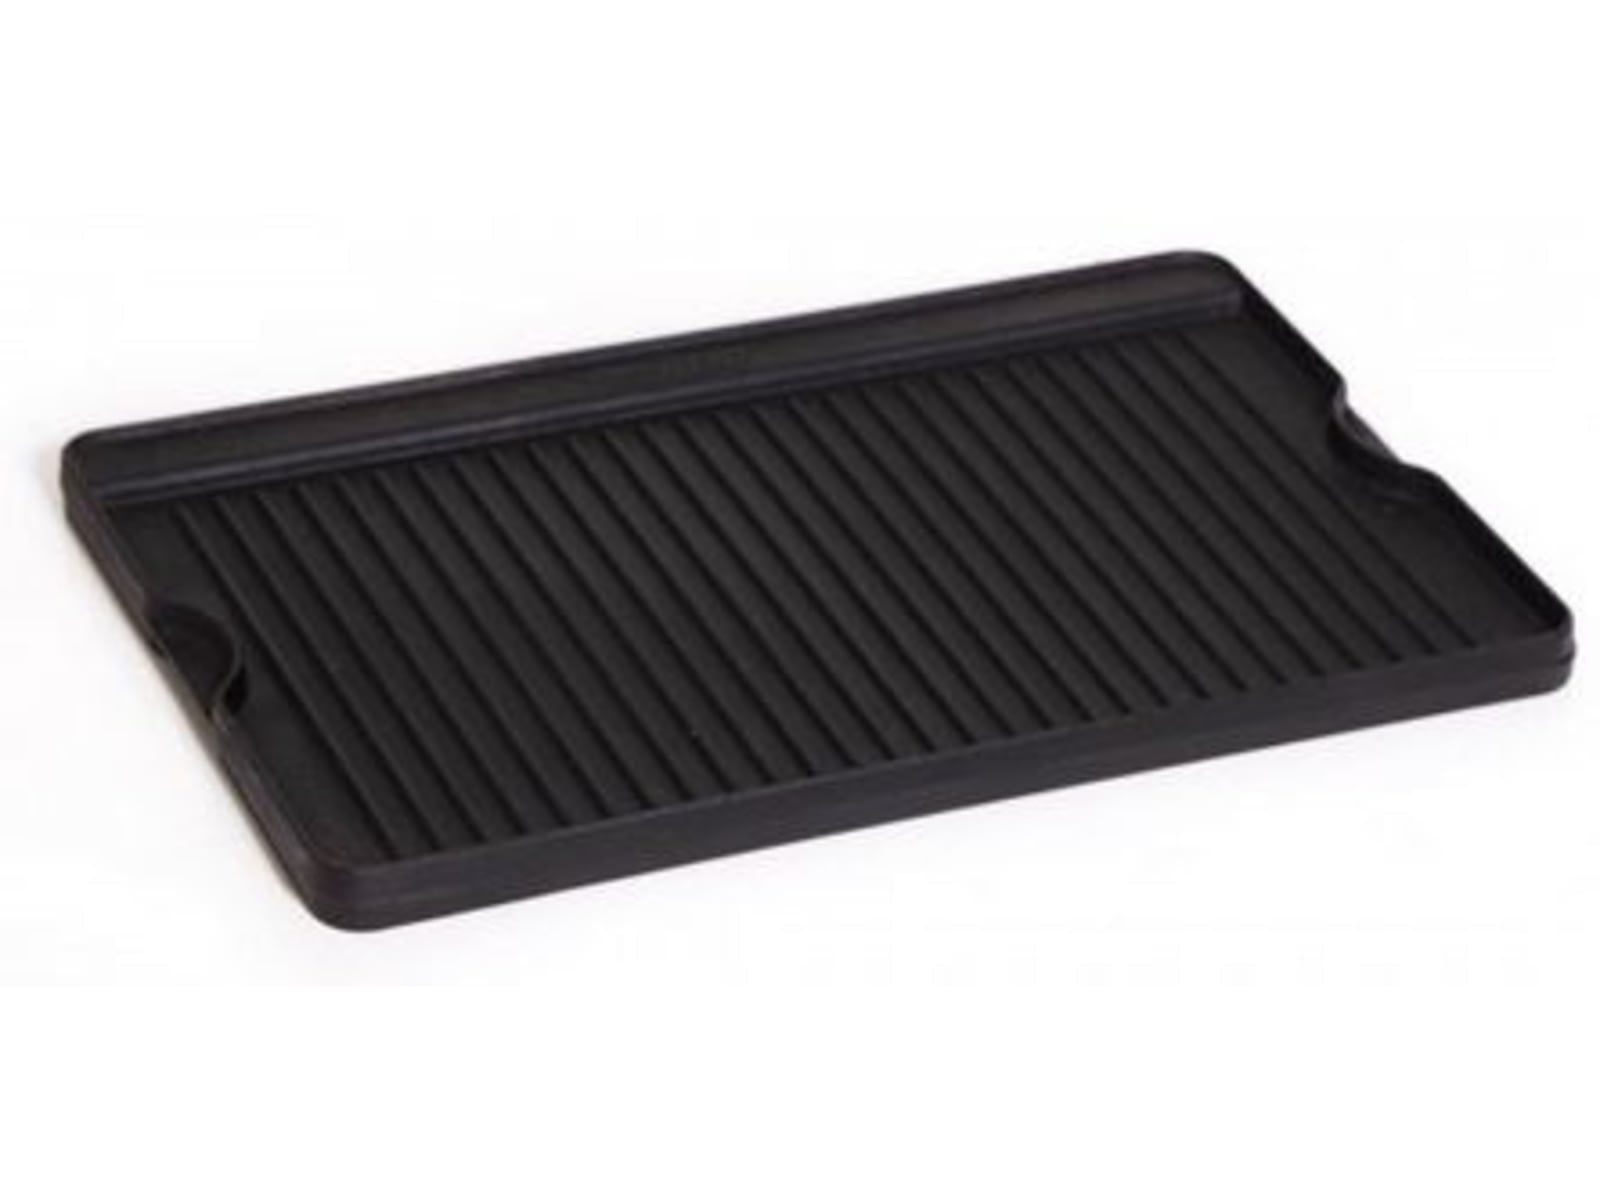 Commercial Chef Reversible Cast Iron Grill / Griddle CHFLRGG5